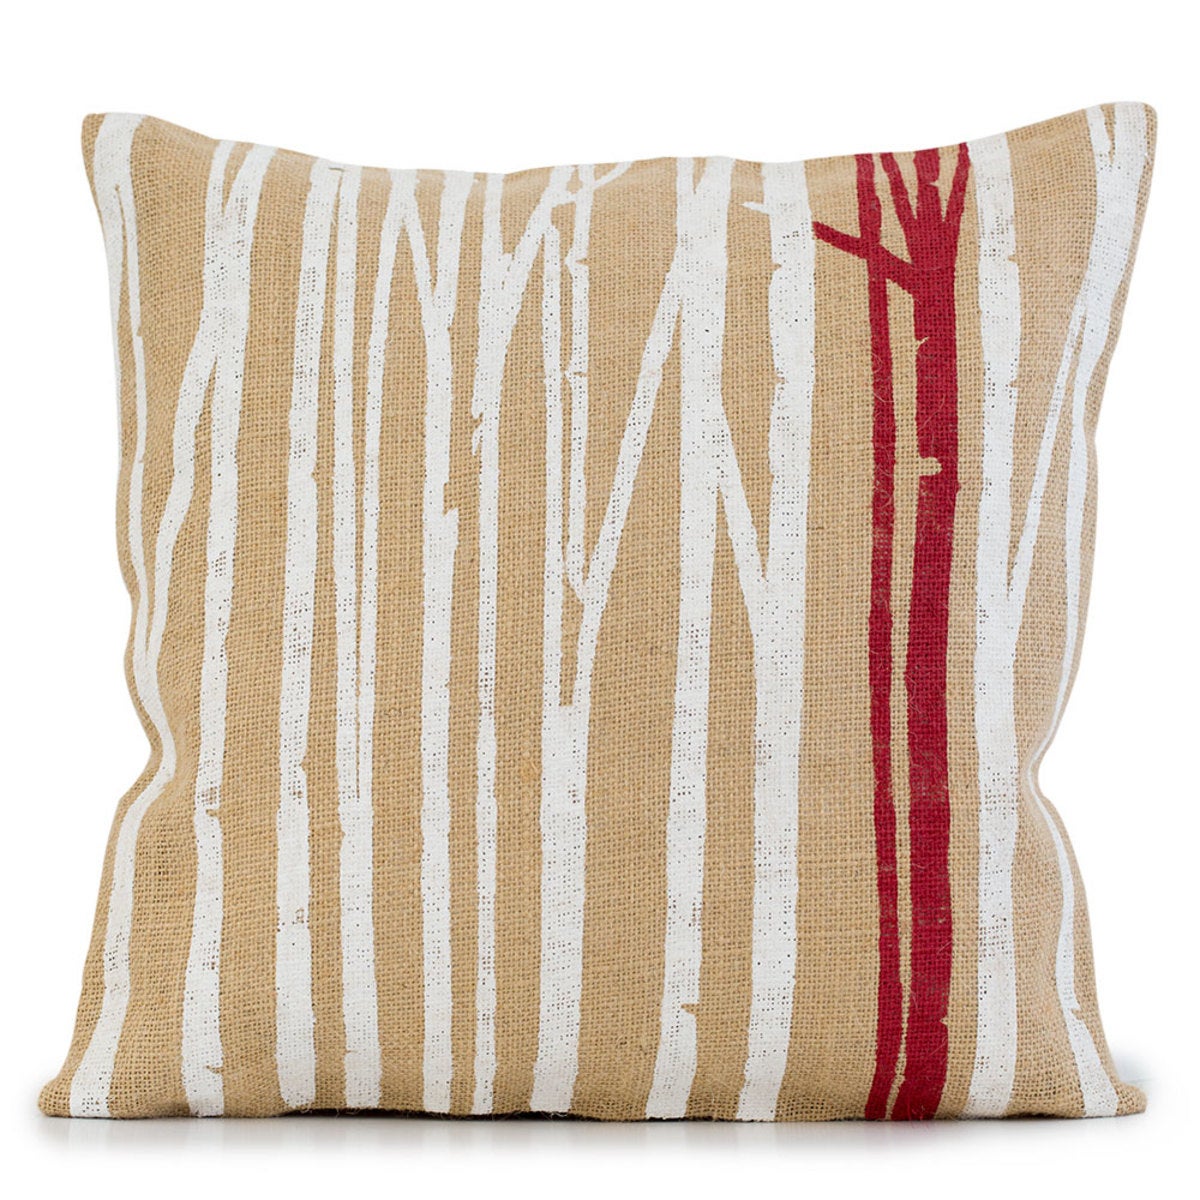 Burlap Branches Pillow Cover